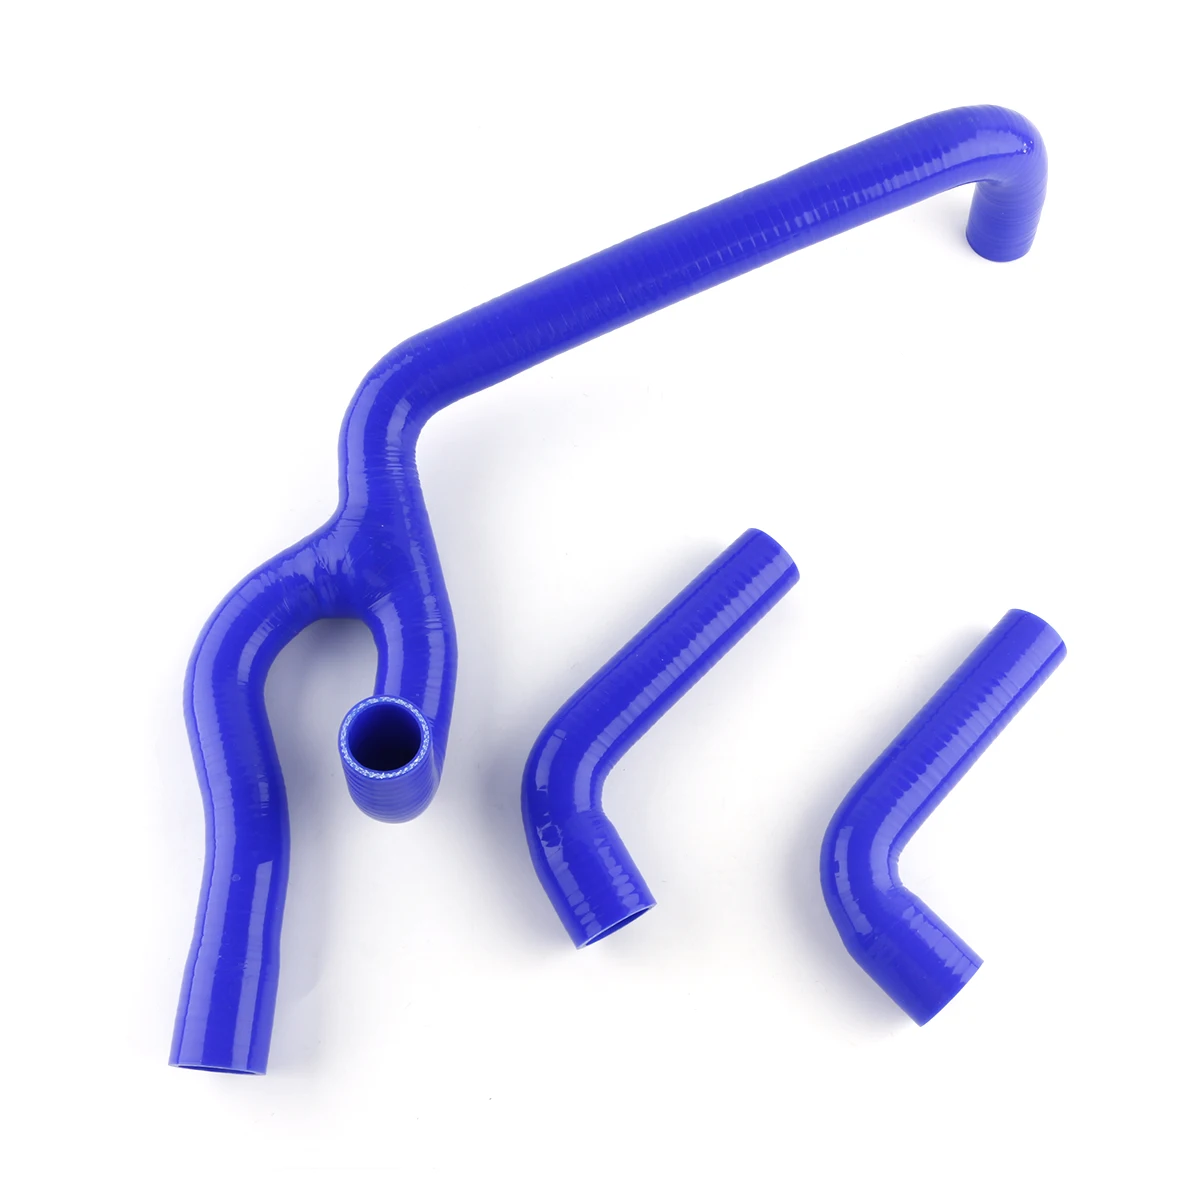 

For Land Rover Freelander 1.8i Petrol Modified 1997-2006 Silicone Tube Coolant Hoses Kit (Oil proofing is required) 3Pcs